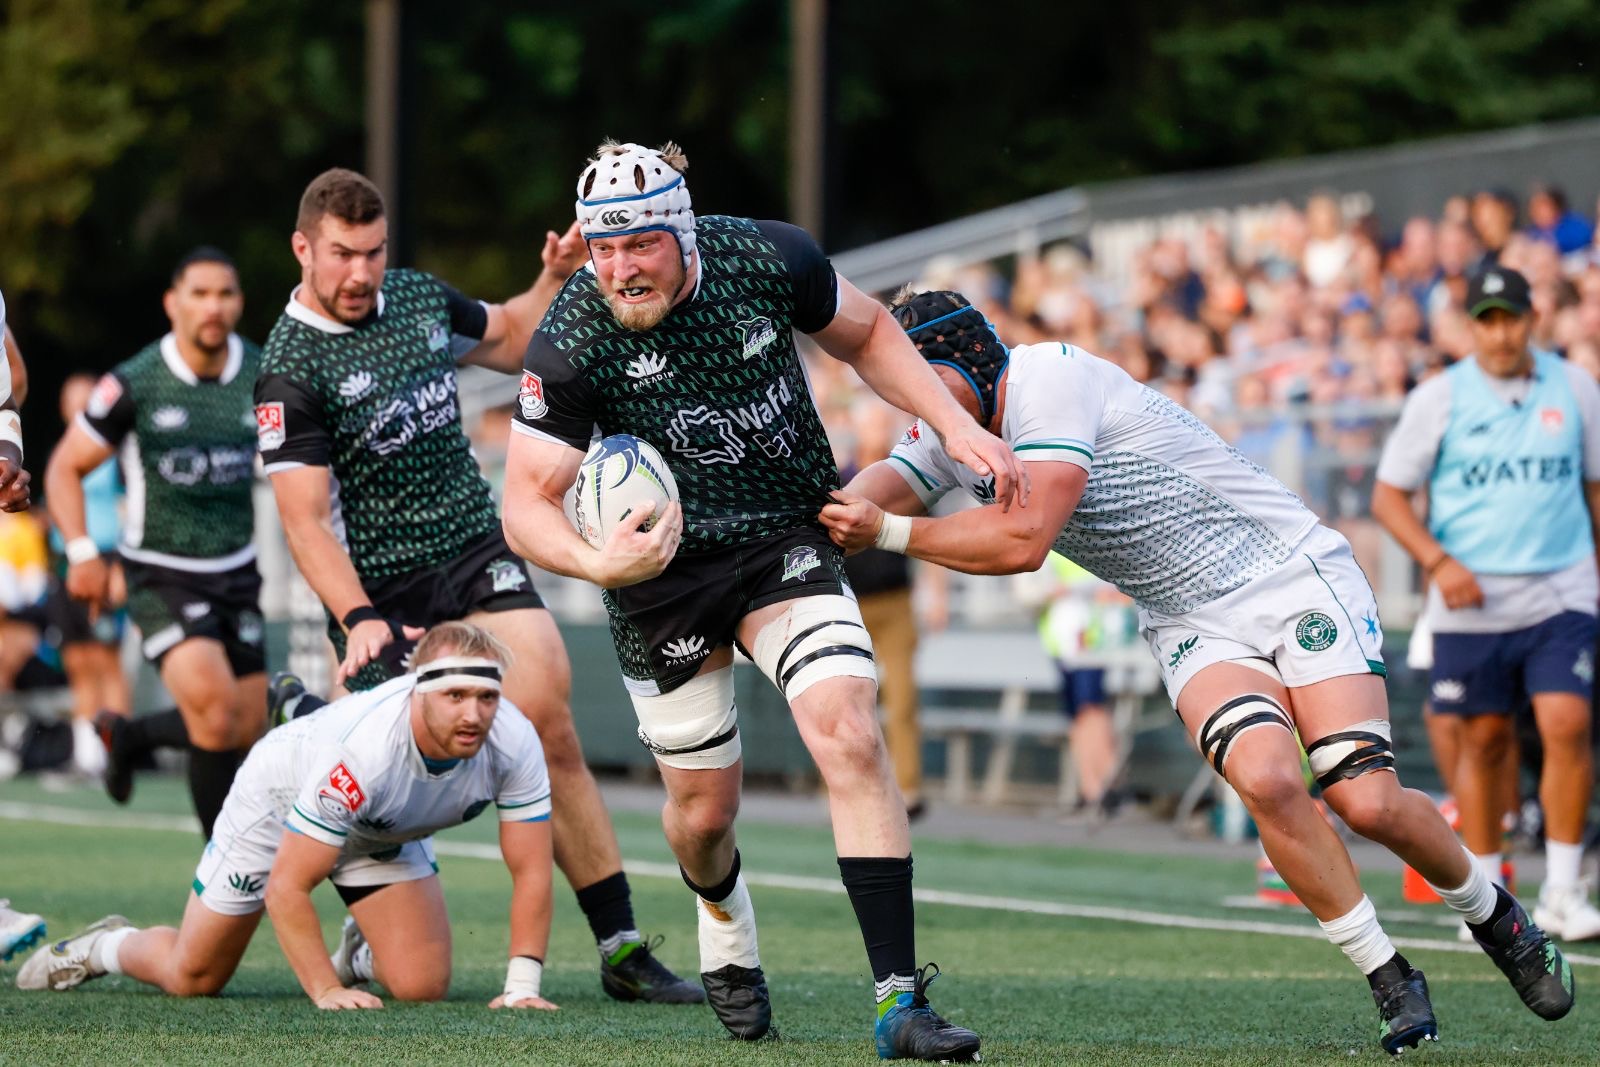 Seawolves Win over Hounds 35-13